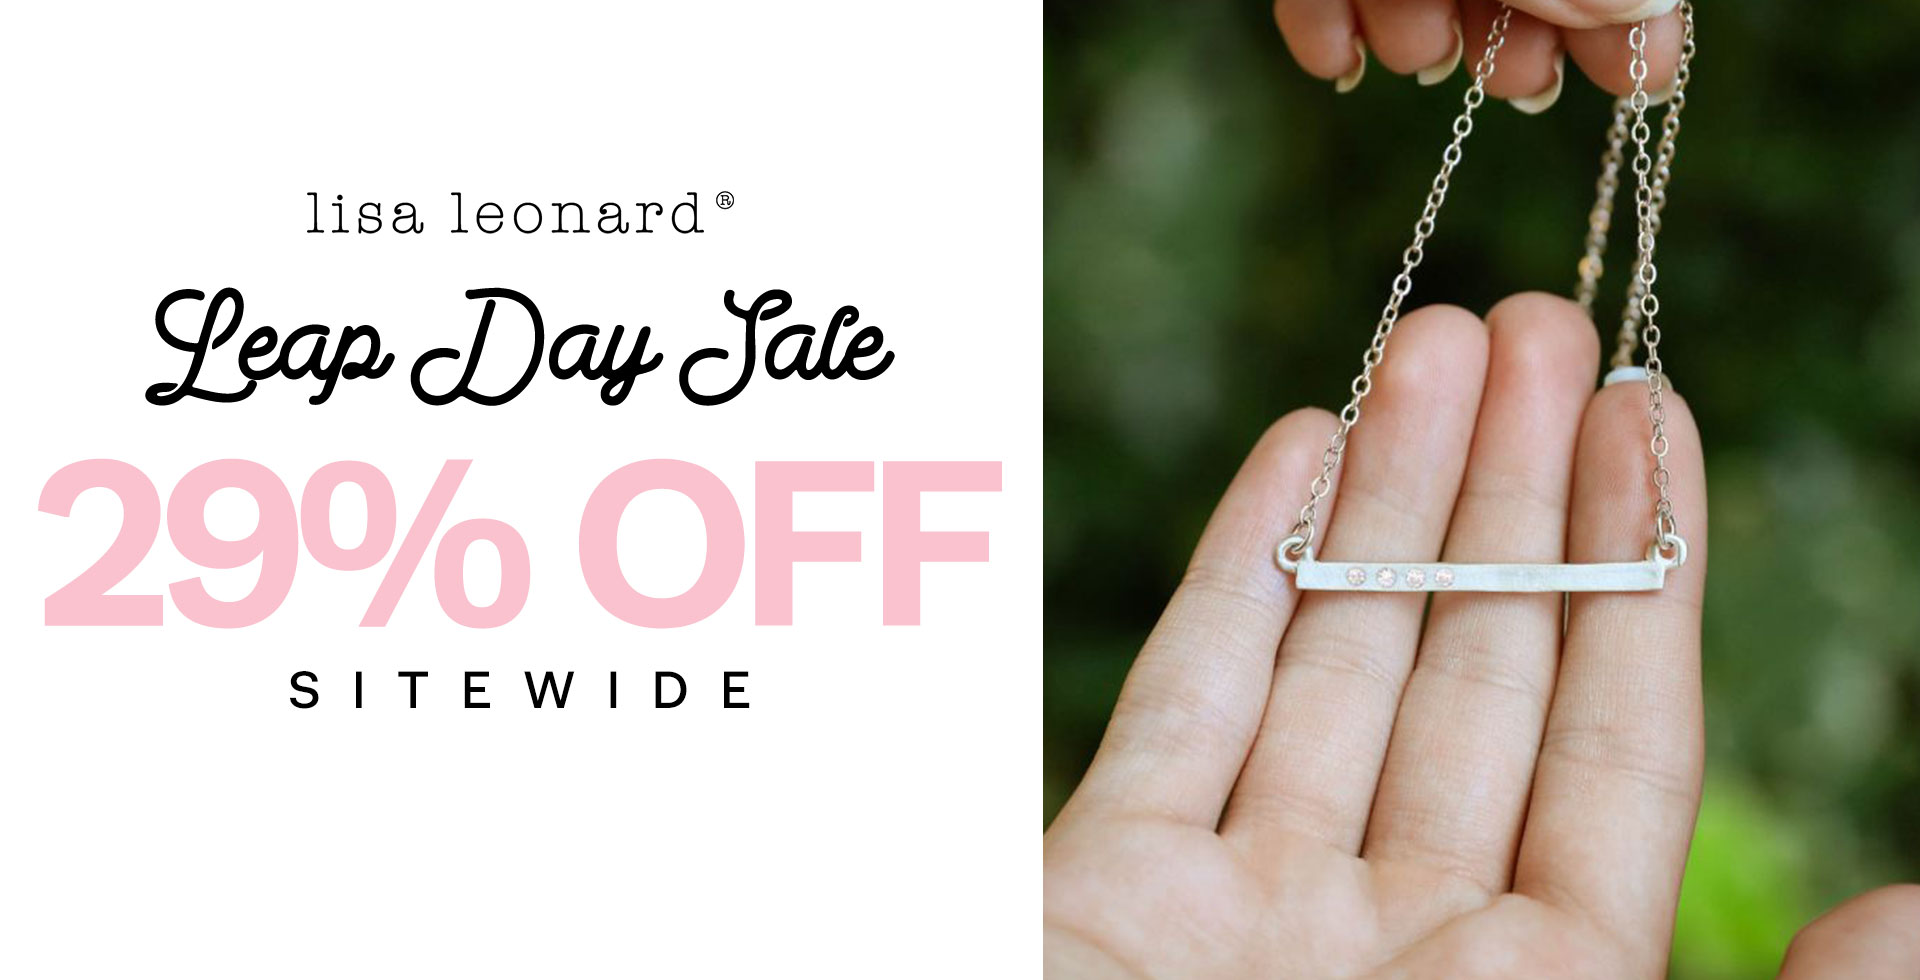 Leap Day Sale 29% off Sitewide